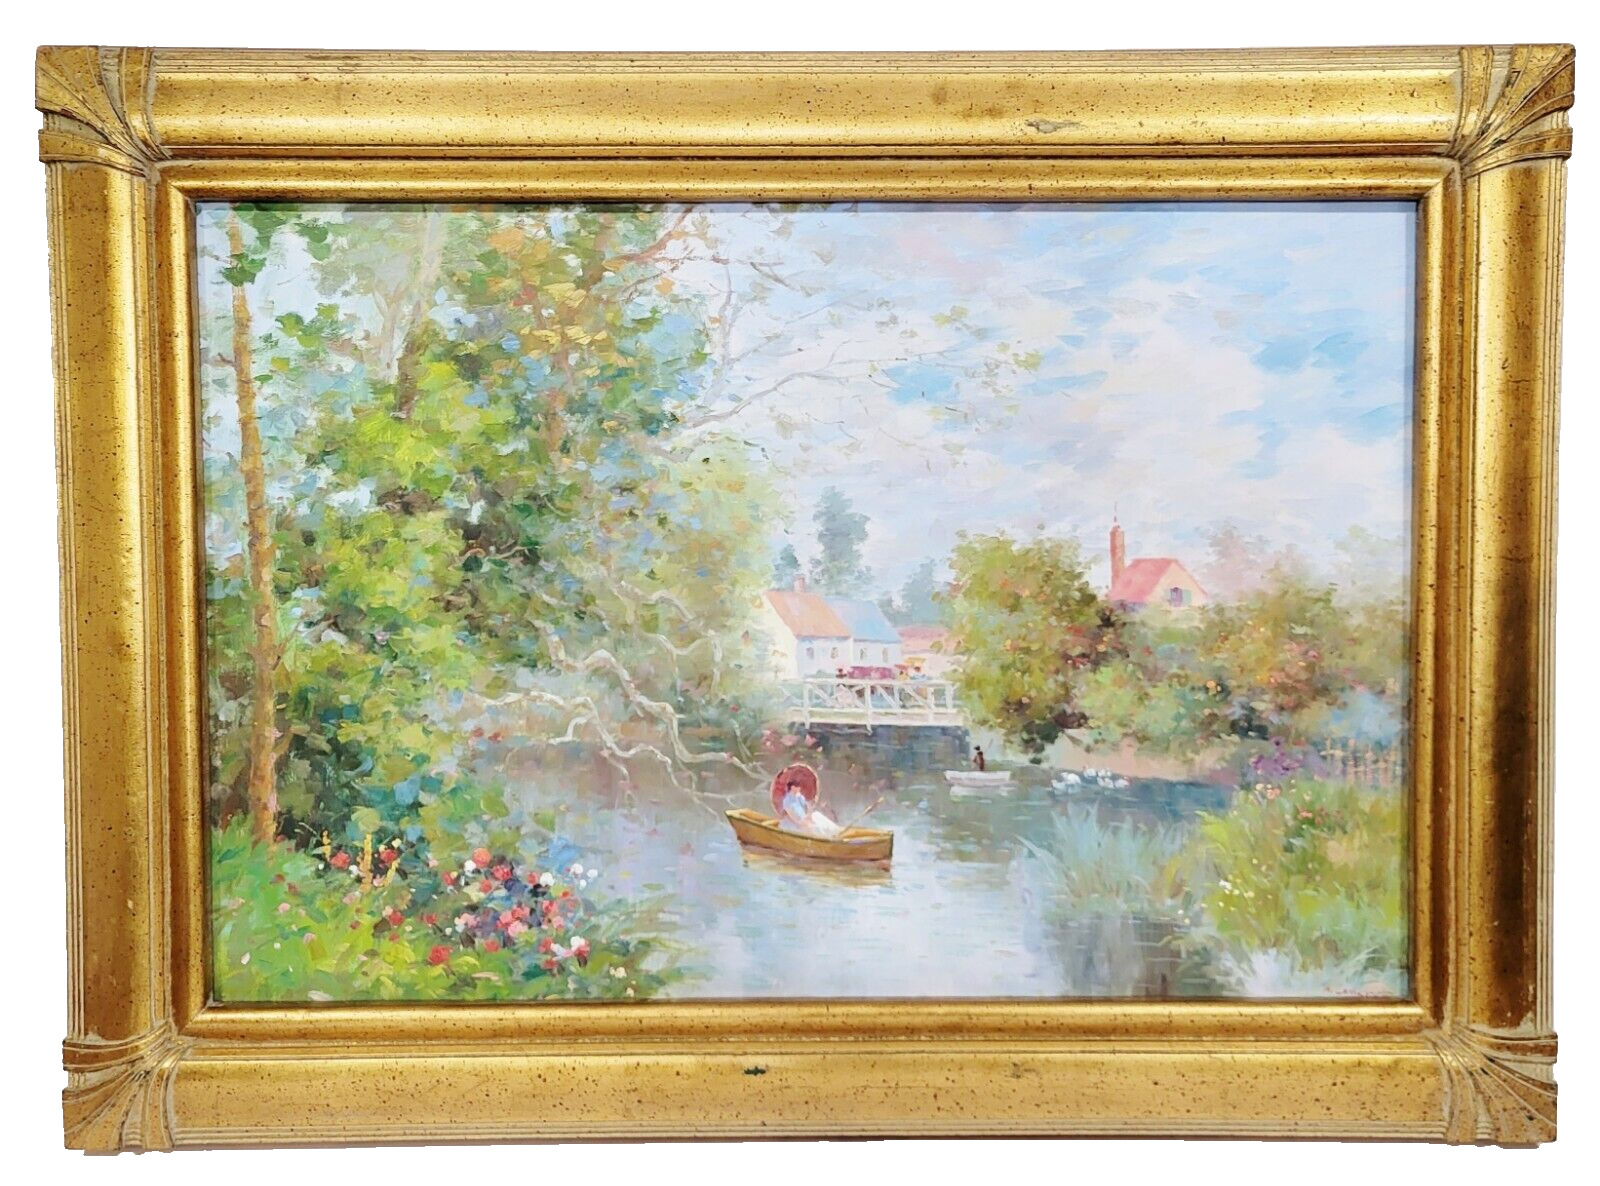 Vintage FRENCH IMPRESSIONISTIC Framed OIL PAINTING Lake Town LADY PARASOL Boat